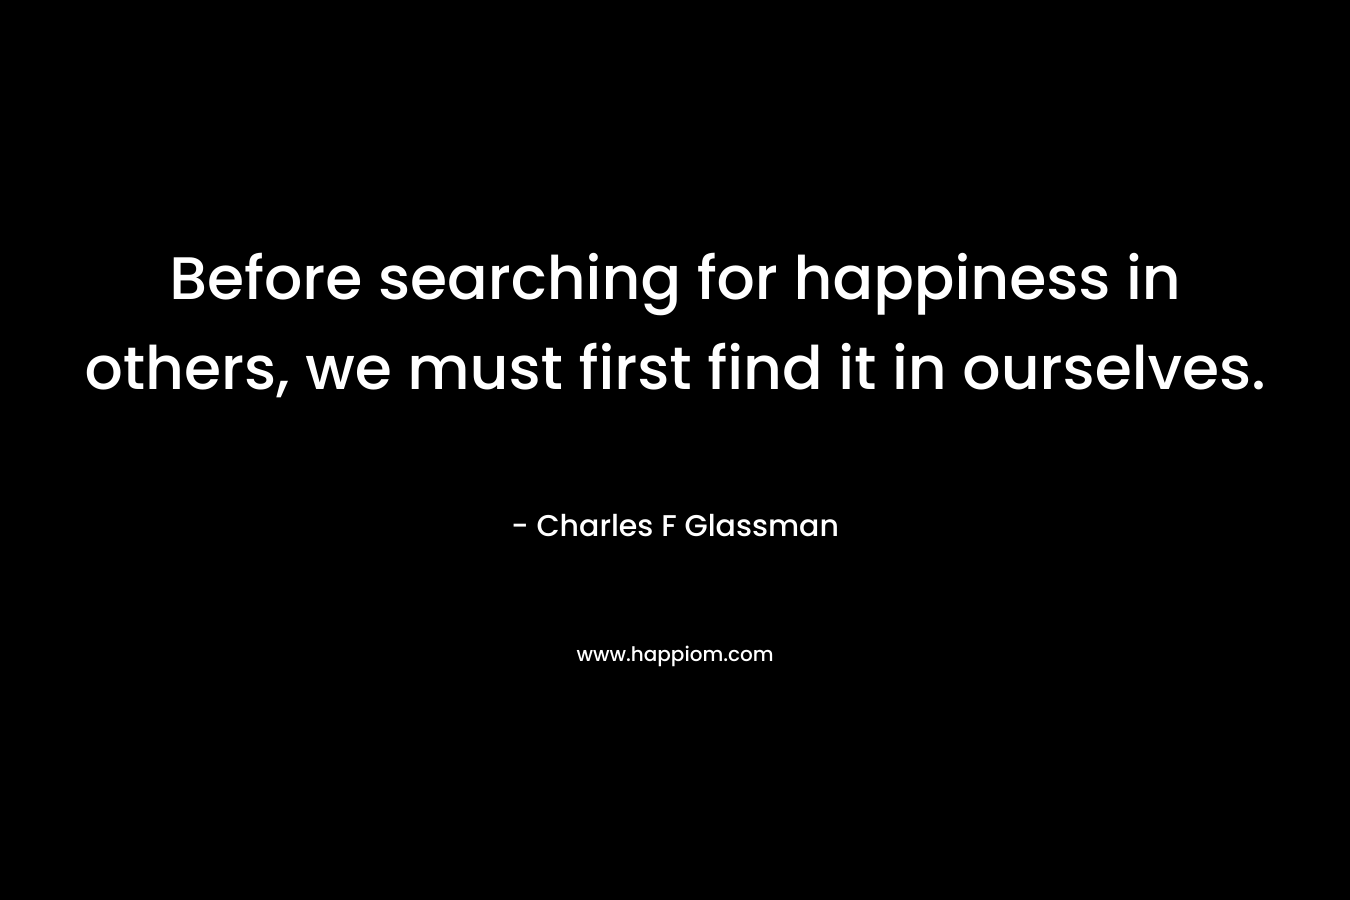 Before searching for happiness in others, we must first find it in ourselves.